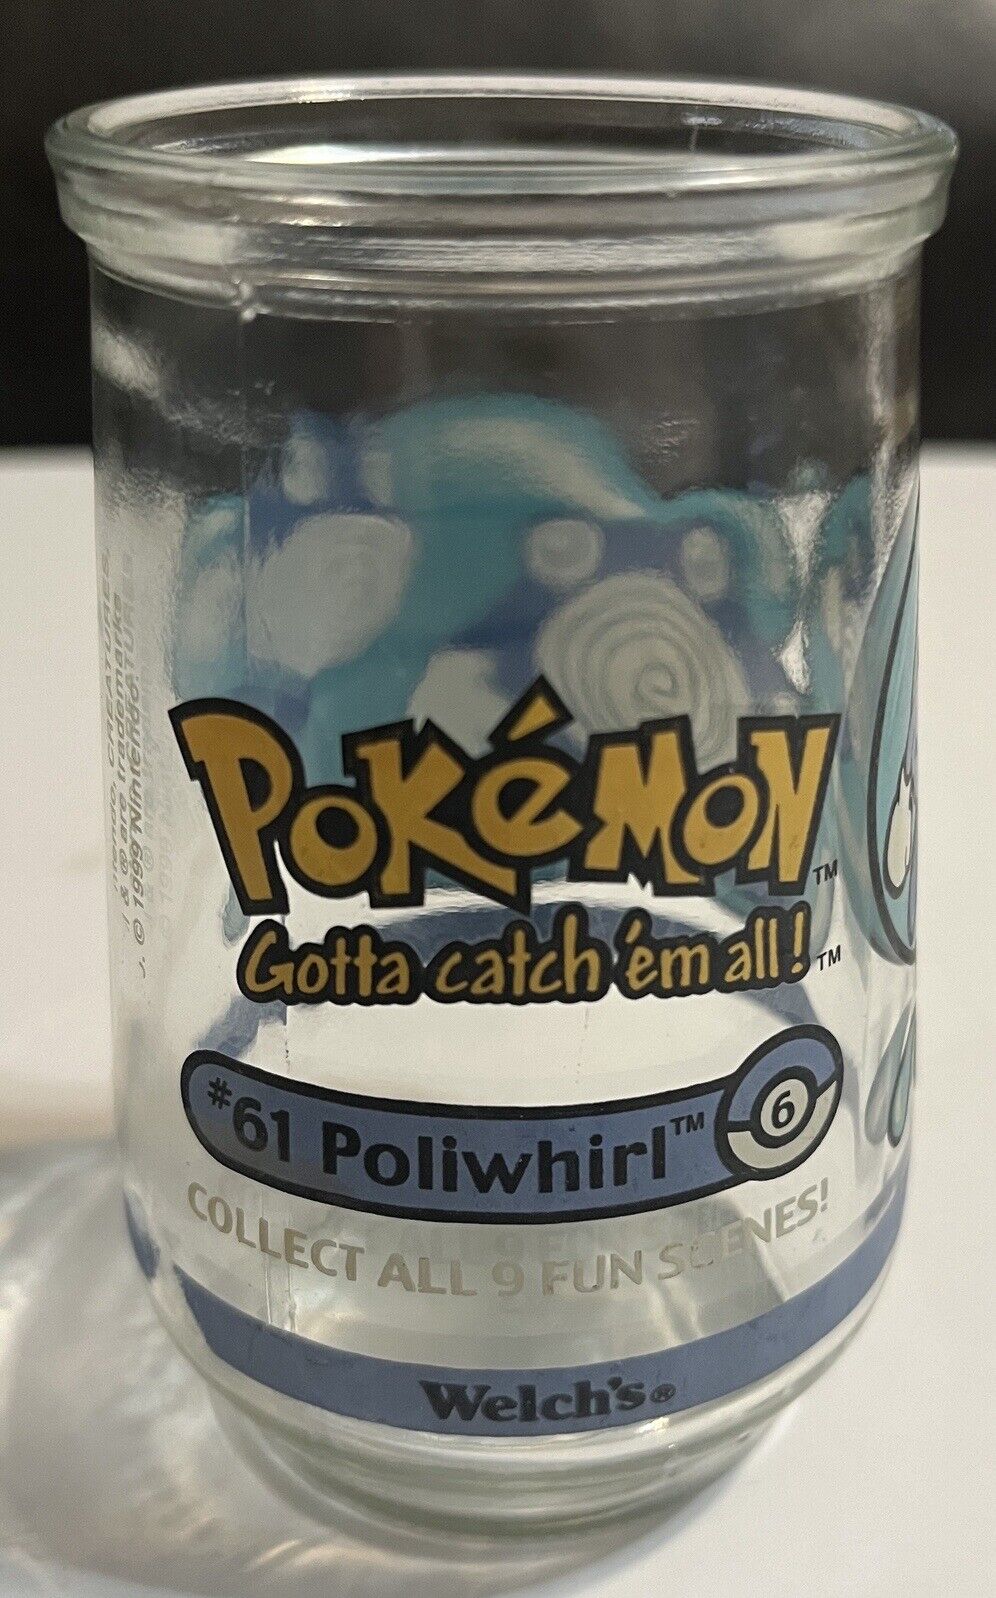 Welch\'s 1999 Nintendo Pokemon #61 Polliwhirl Collectible Jelly Jar Glass Used